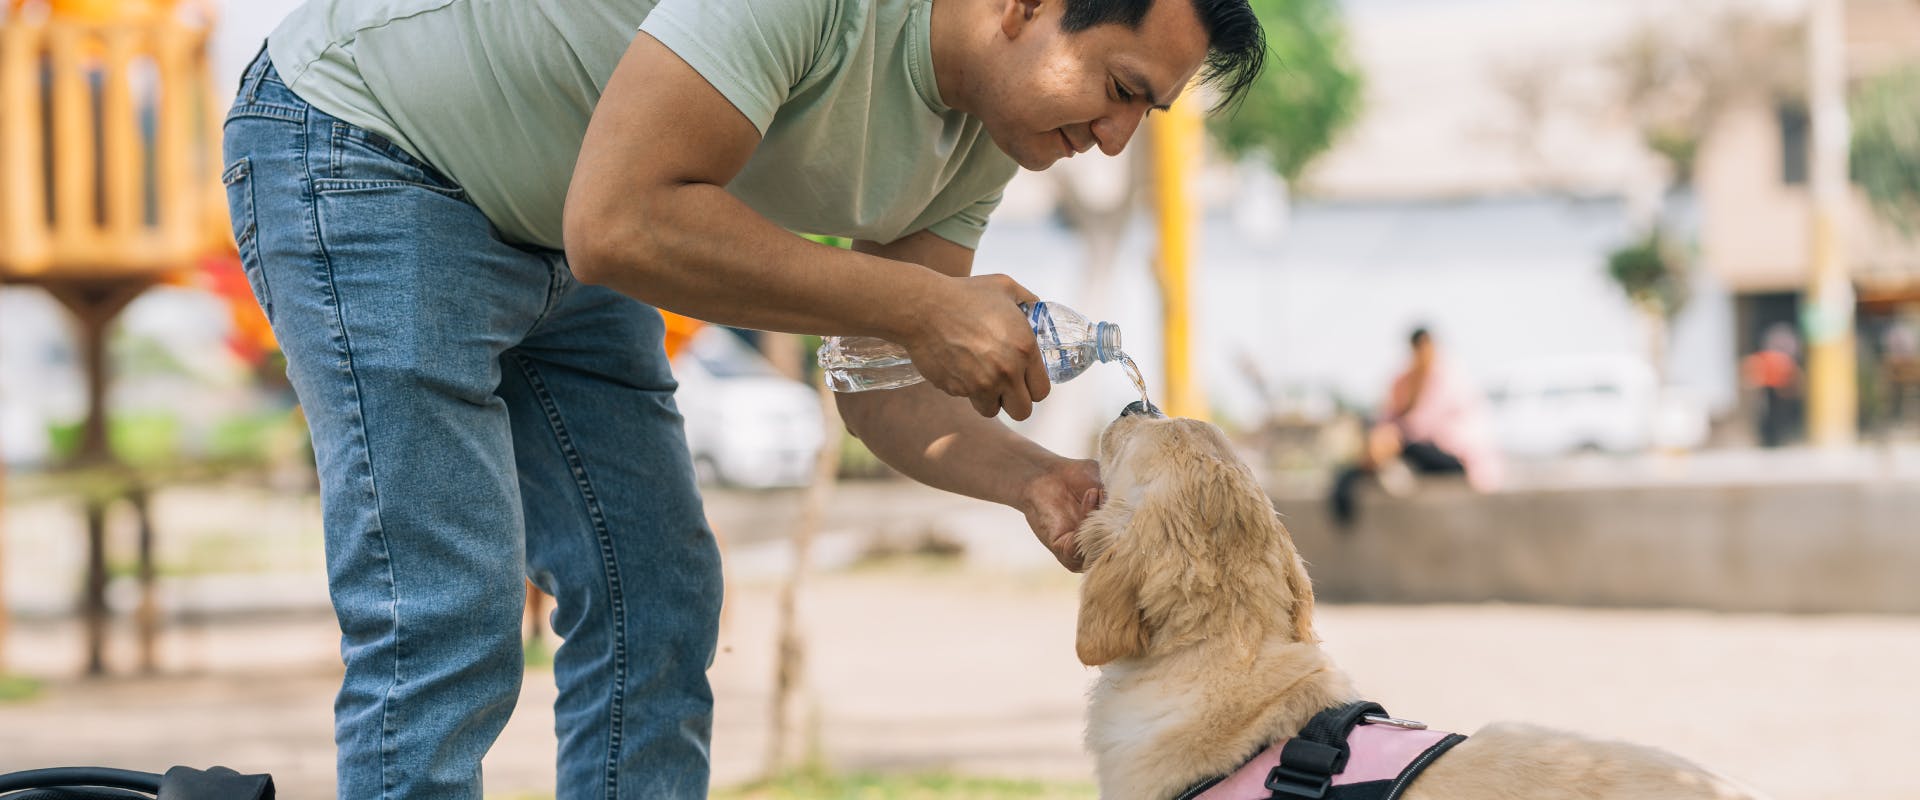 a young goldie with a pink harness drinking from a water bottle being held by a man in a green shirt in an urban play park